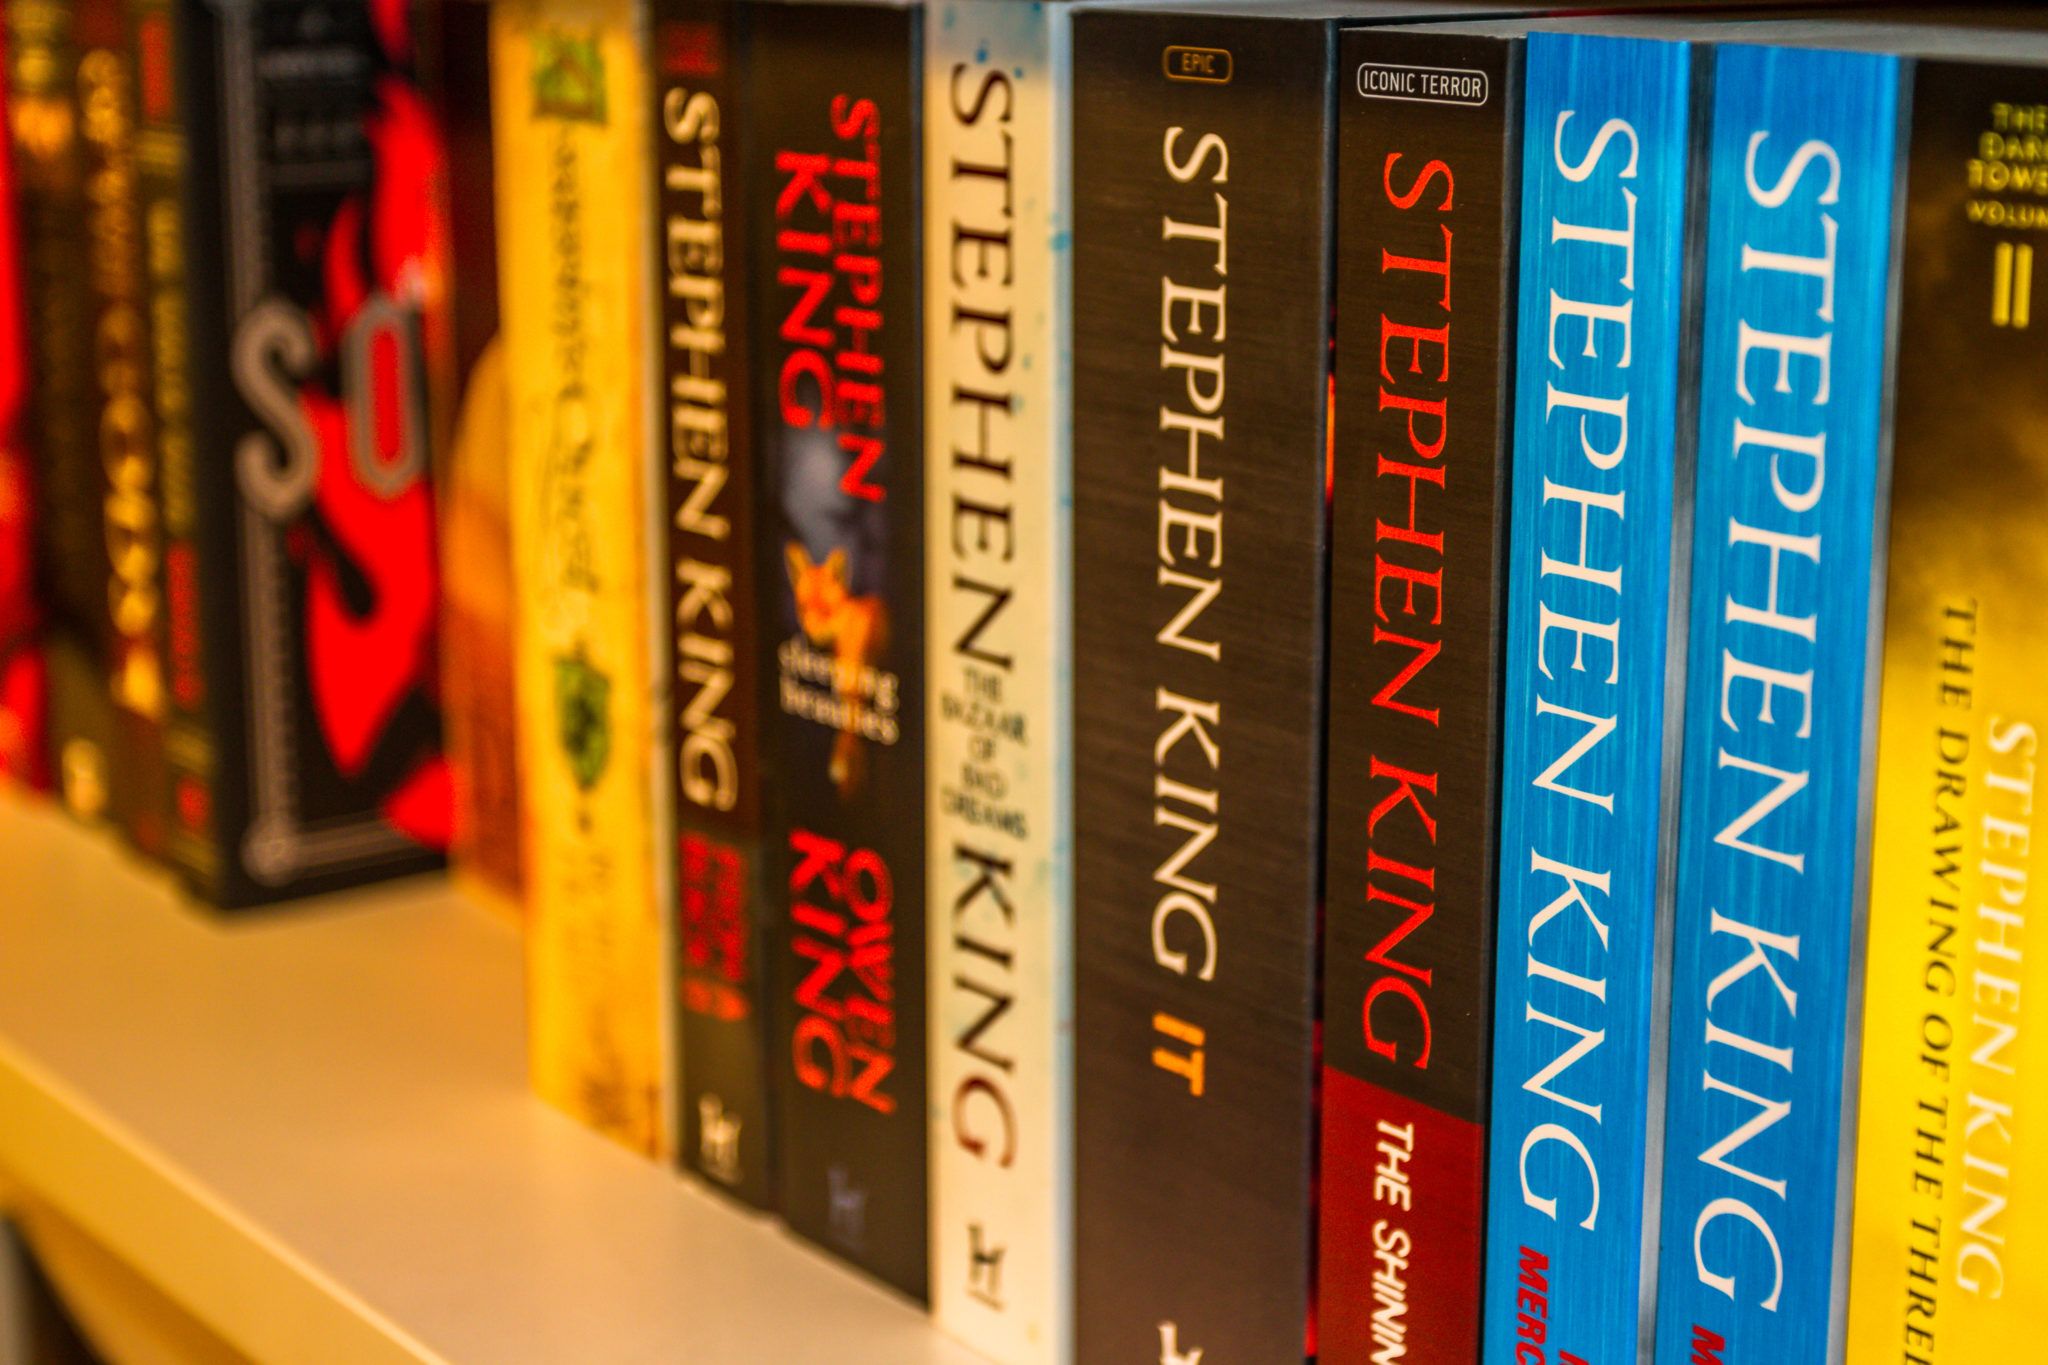 5 scariest Stephen King novels to read for Halloween